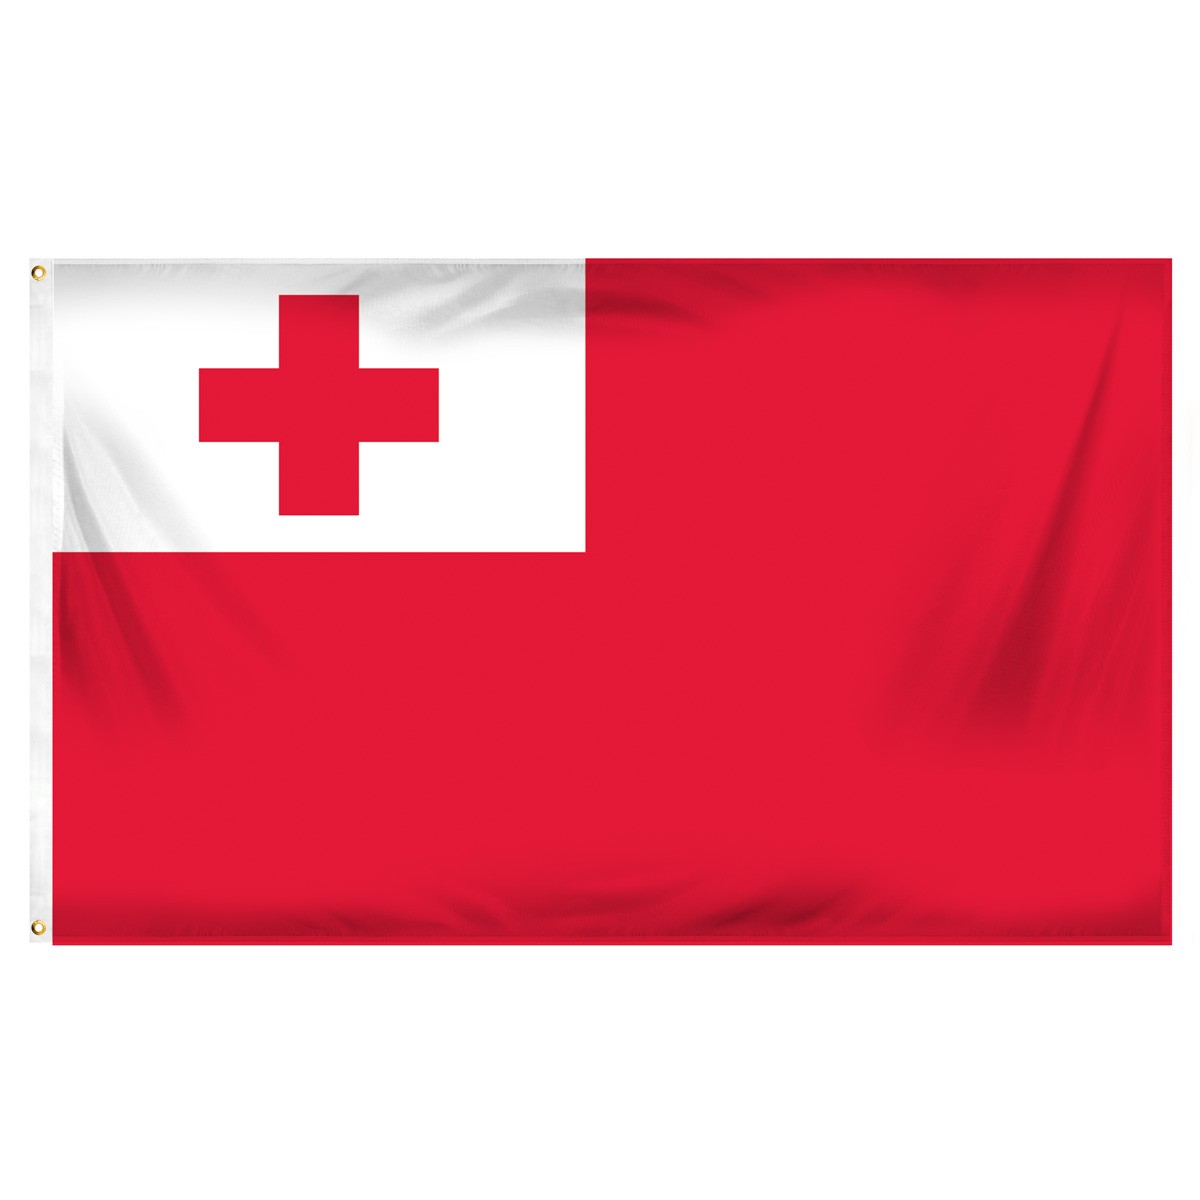 Tonga Posters and Banners